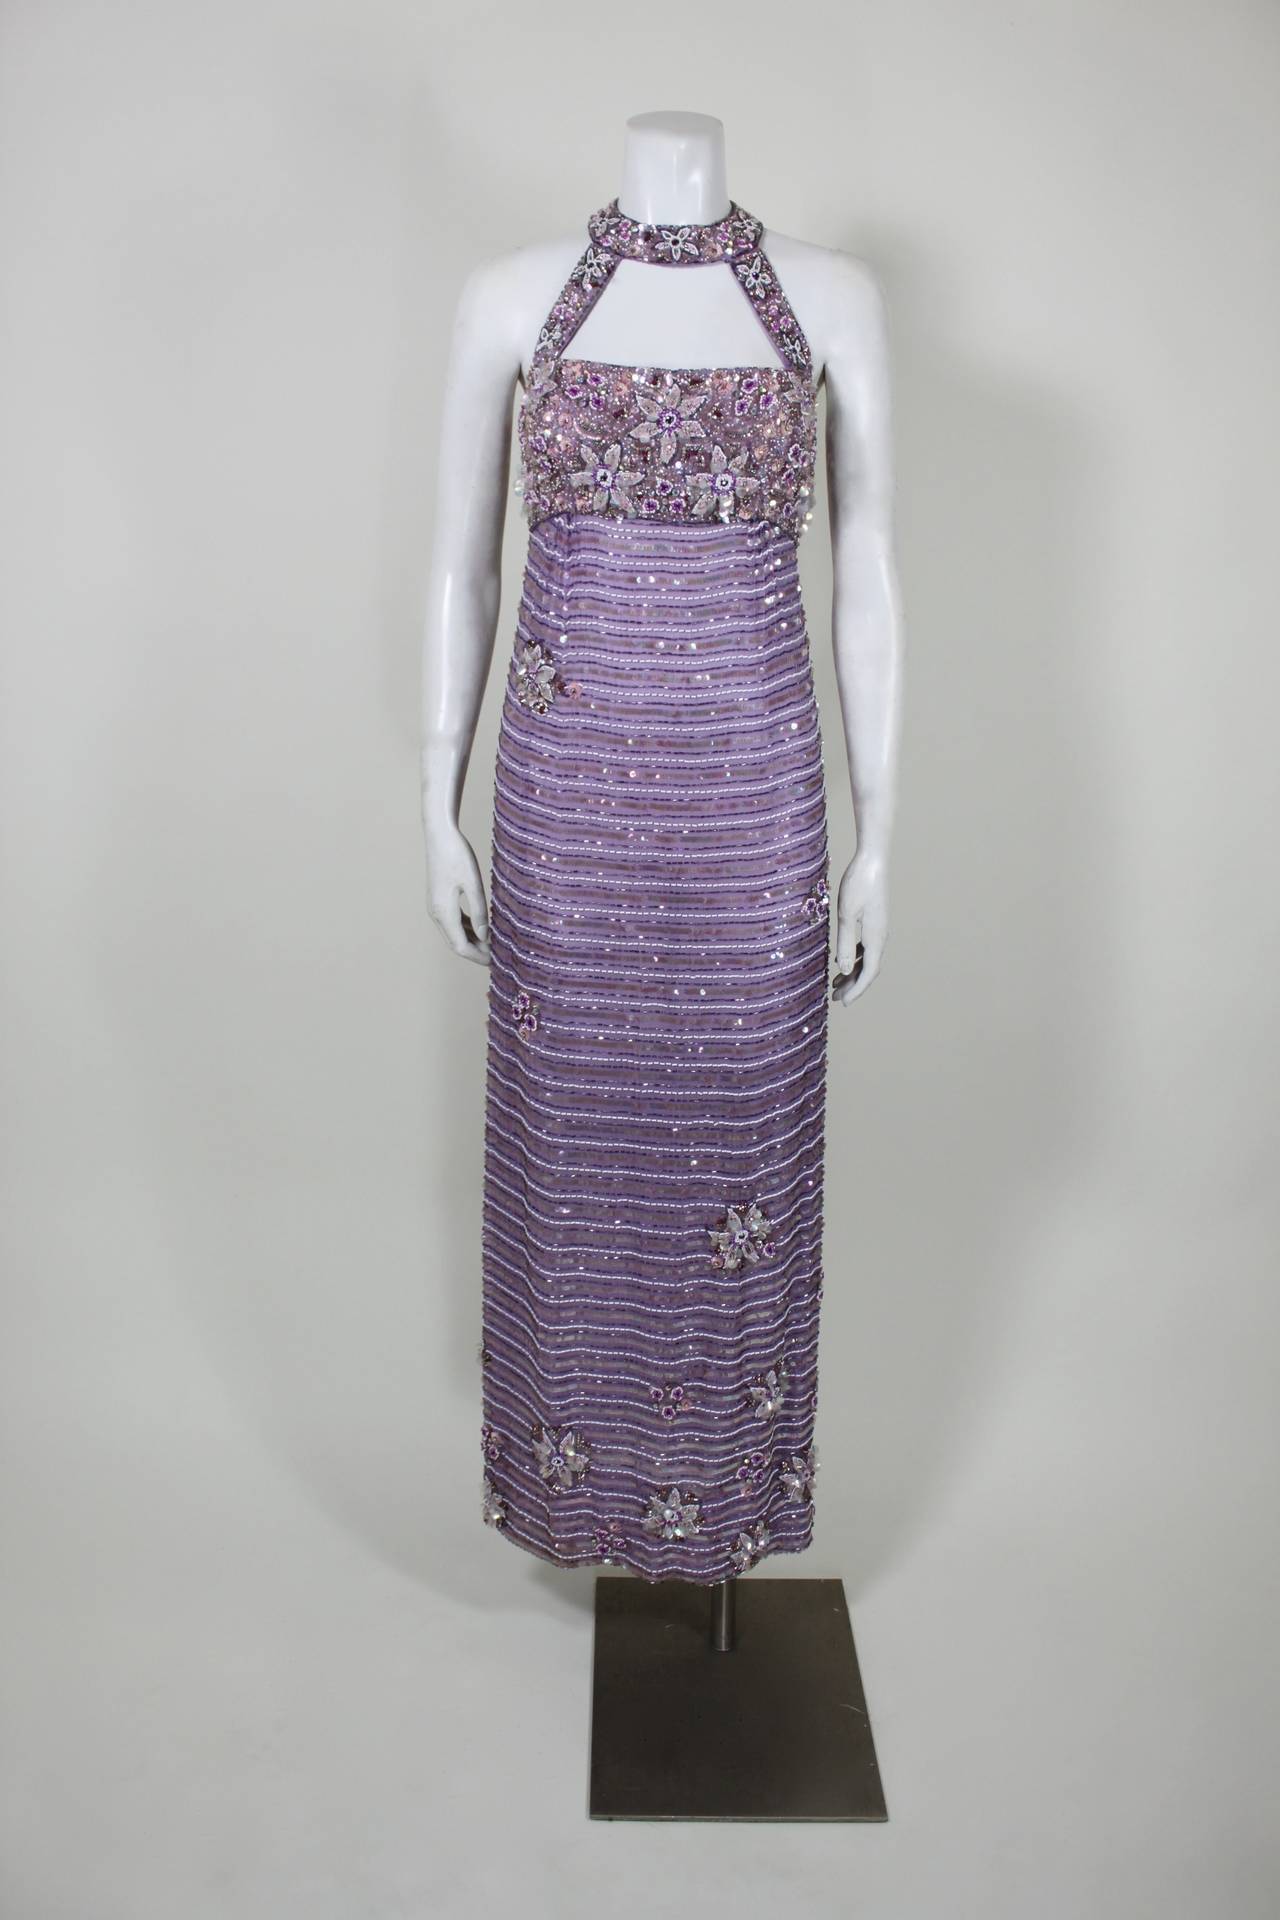 A show-stopping and sexy gown. A gorgeous shade of lavender is embellished throughout with dazzling bugle beads and sequins. The clusters of flowers feature iridescent paillettes and prong-set rhinestones. A classic column silhouette is given a